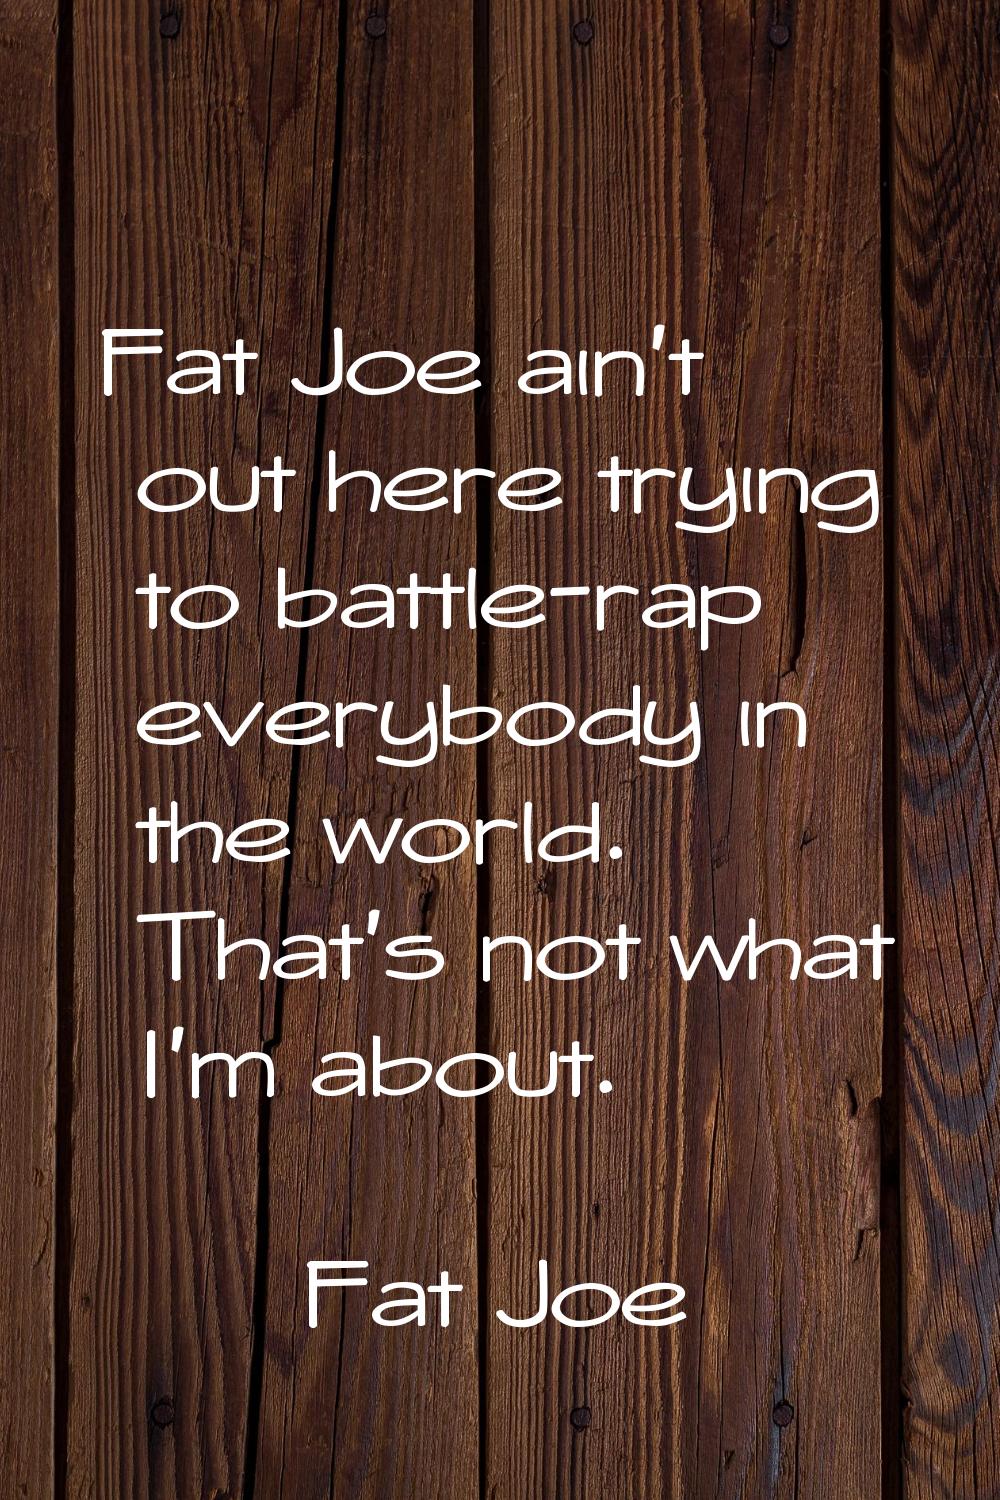 Fat Joe ain't out here trying to battle-rap everybody in the world. That's not what I'm about.